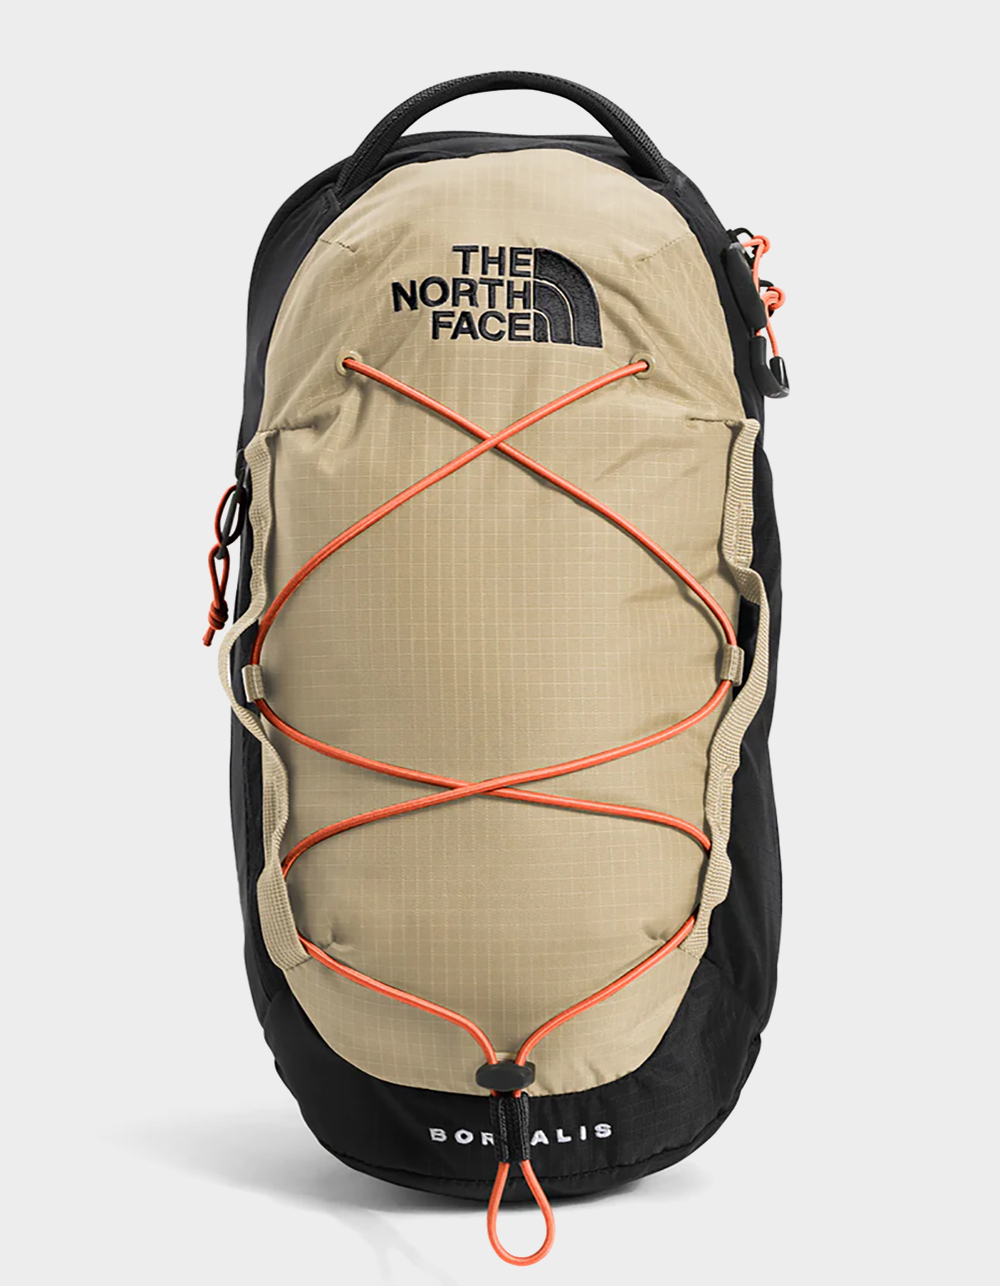 THE NORTH FACE Borealis Sling Pack - TAN | Tillys